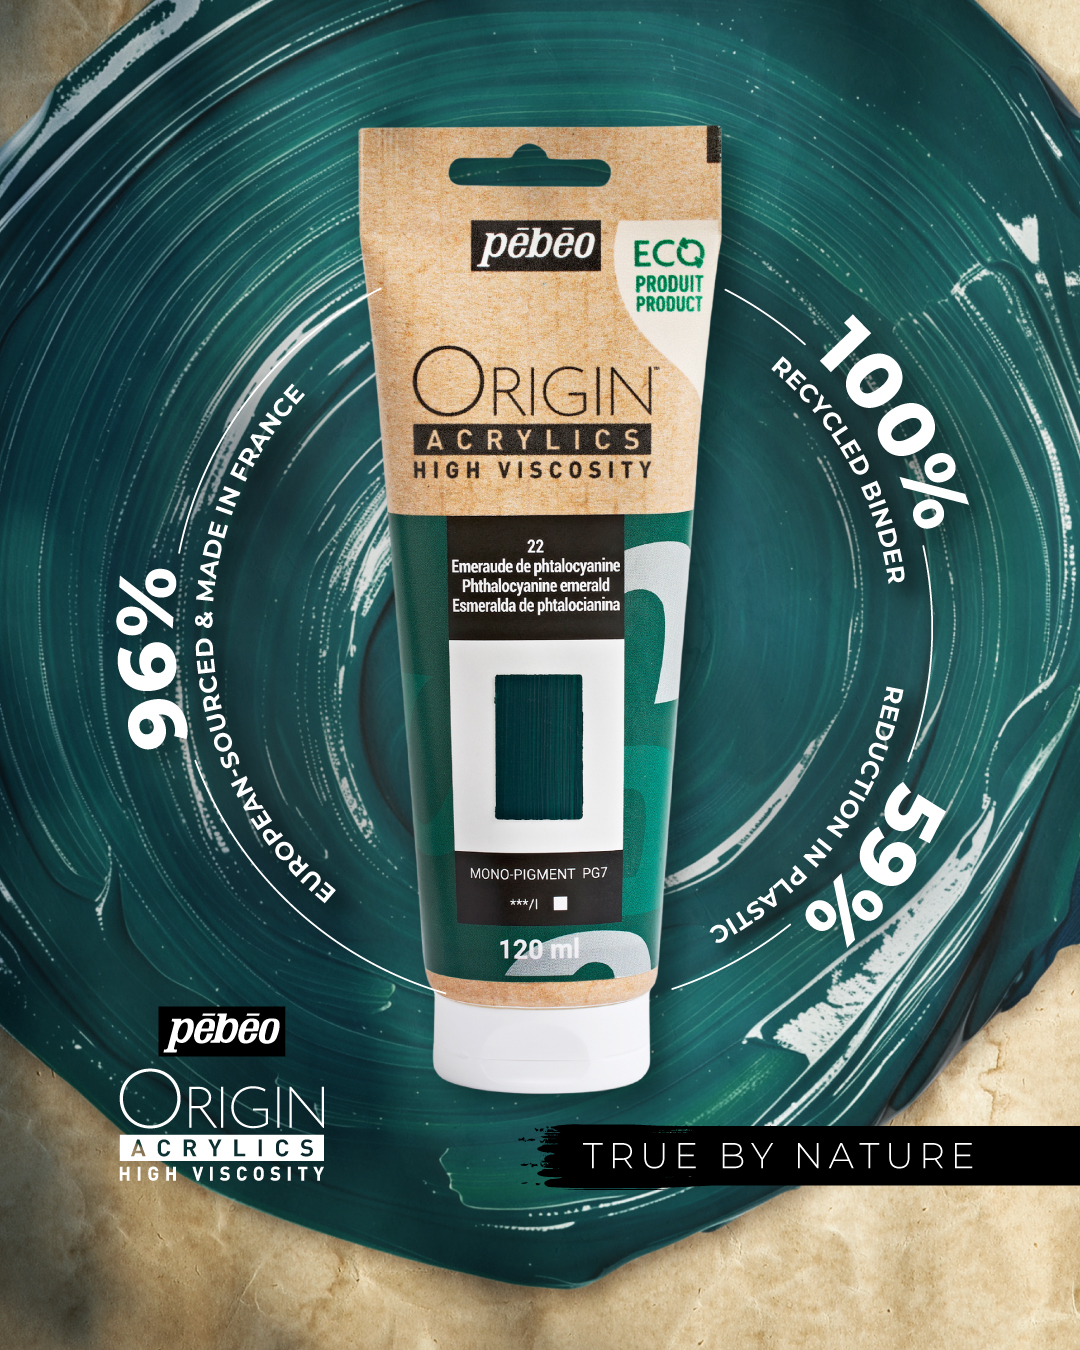 Our Origin range is eco-designed using a 100% recycled binder, reducing carbon footprint by 80% compared to non-recyc...